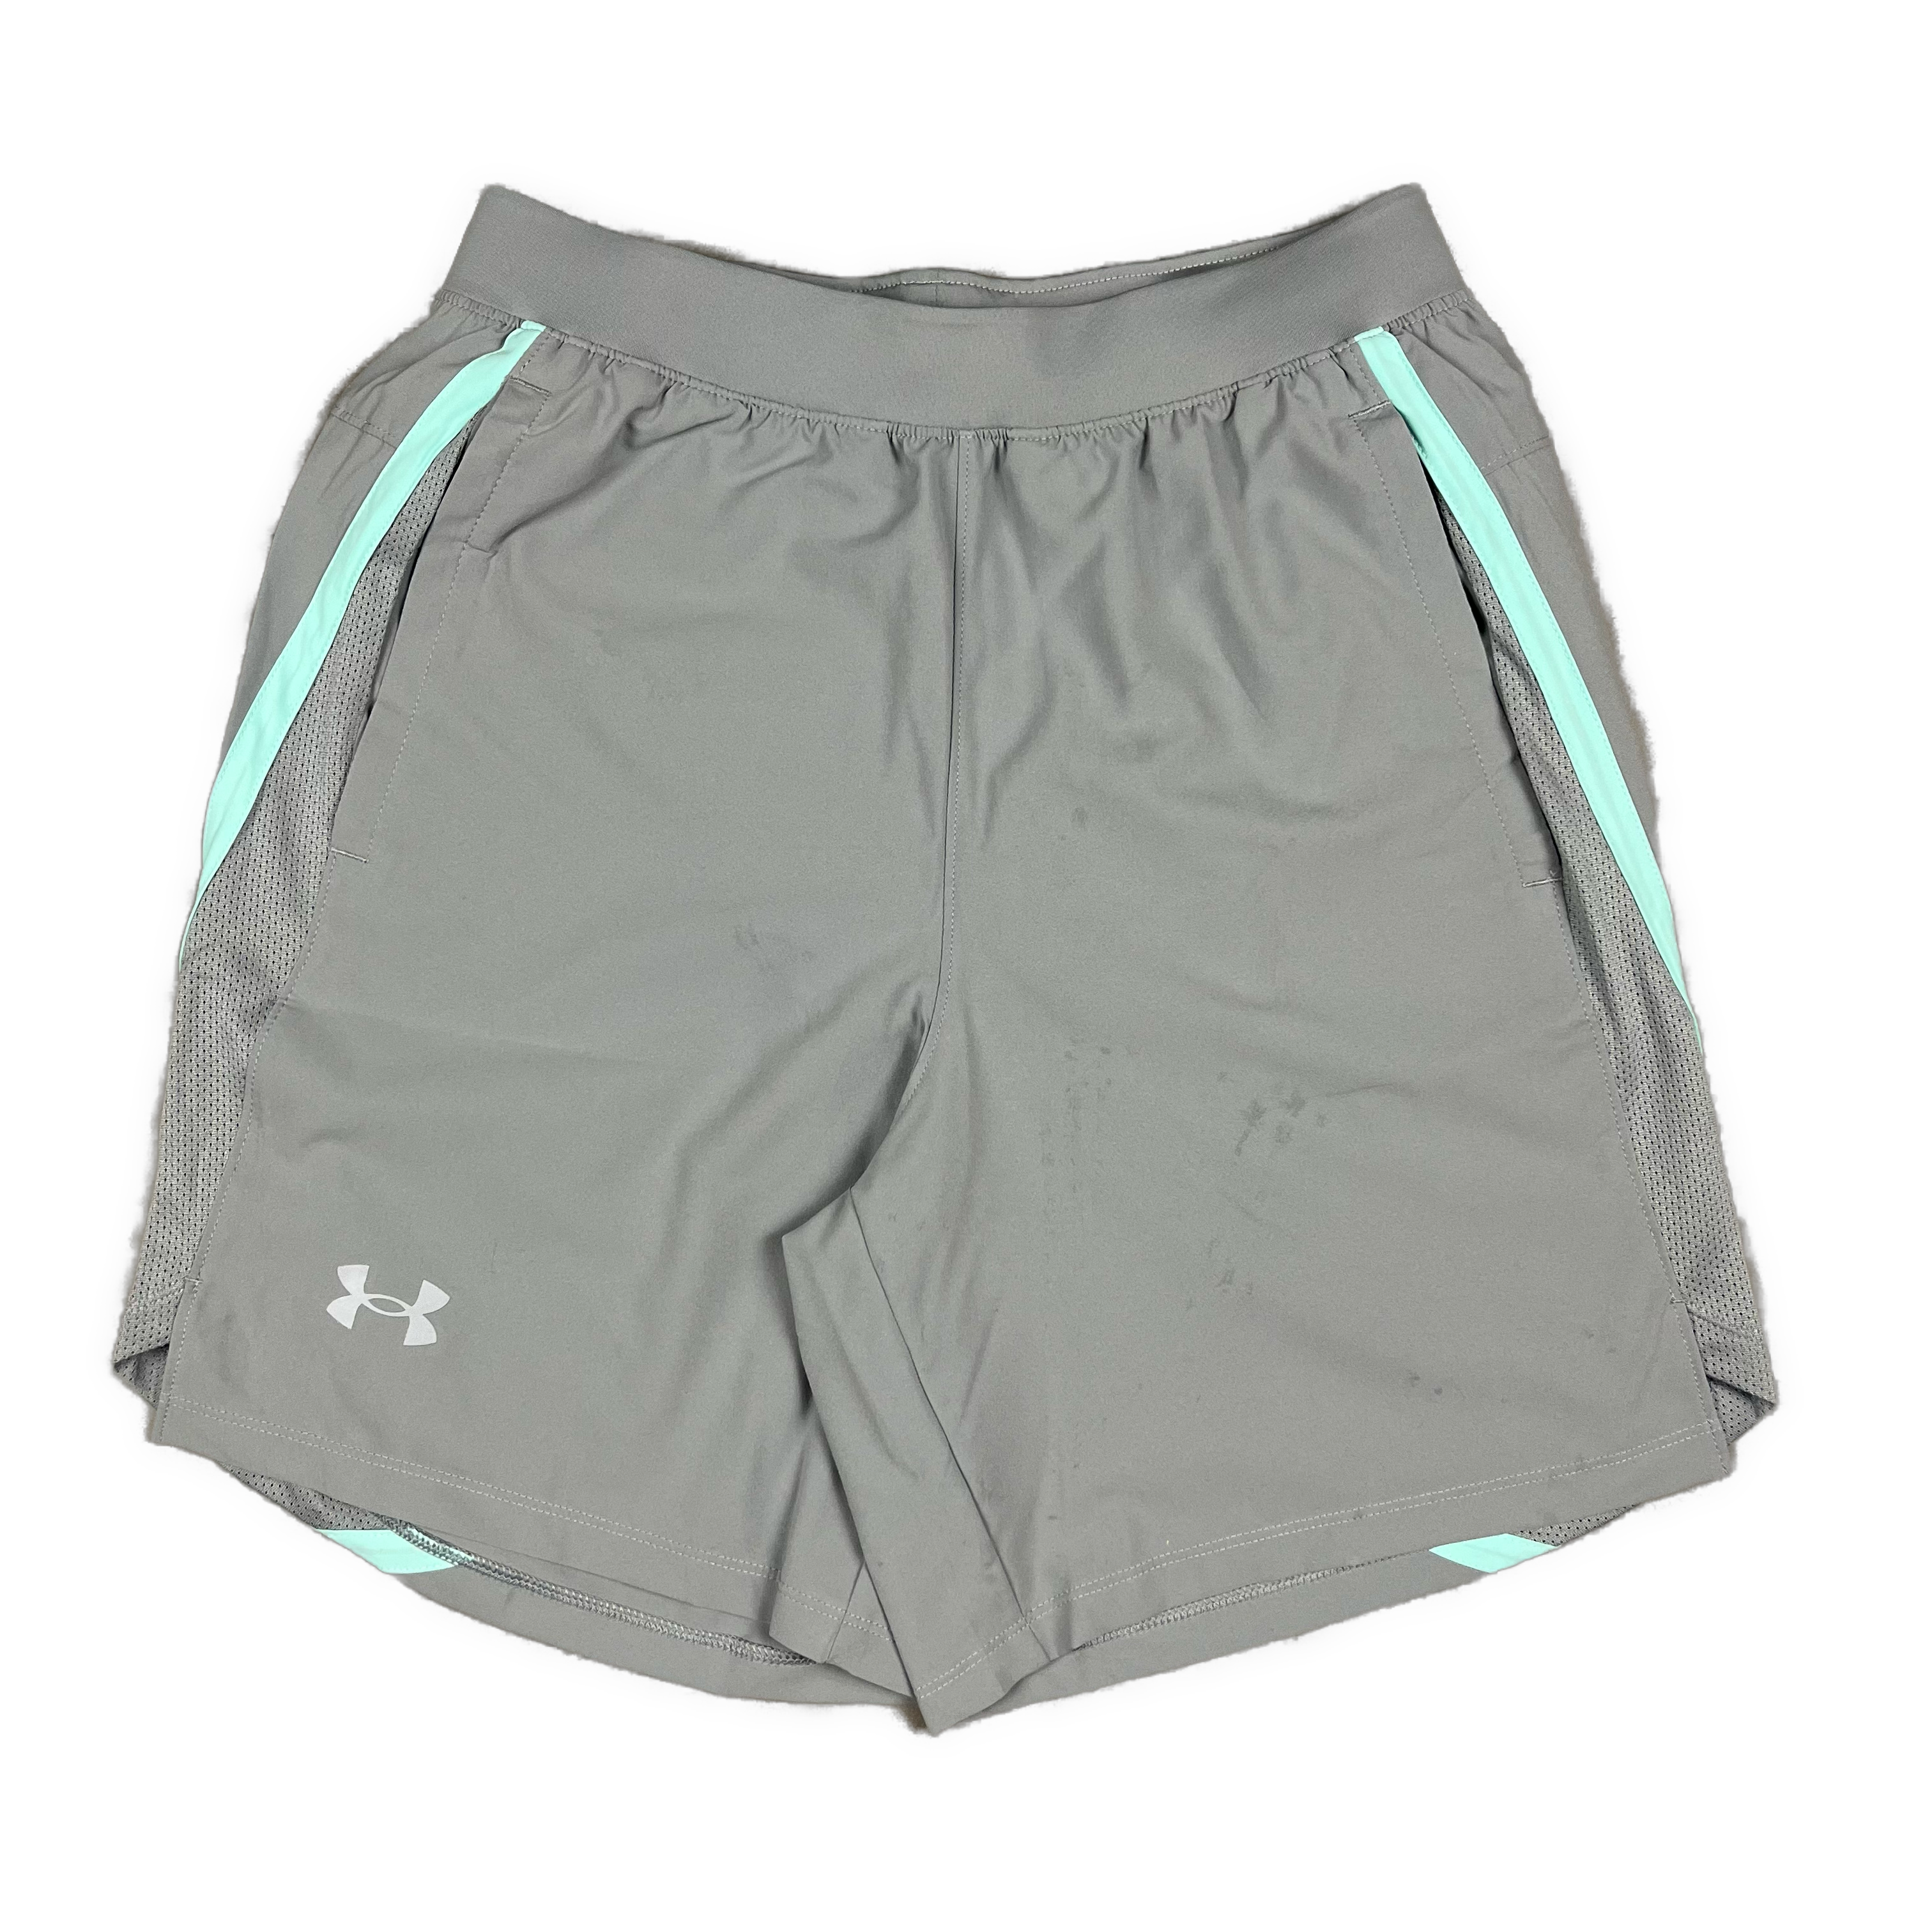 UNDER ARMOUR LAUNCH SHORTS 7" - GREY / TURQUOISE